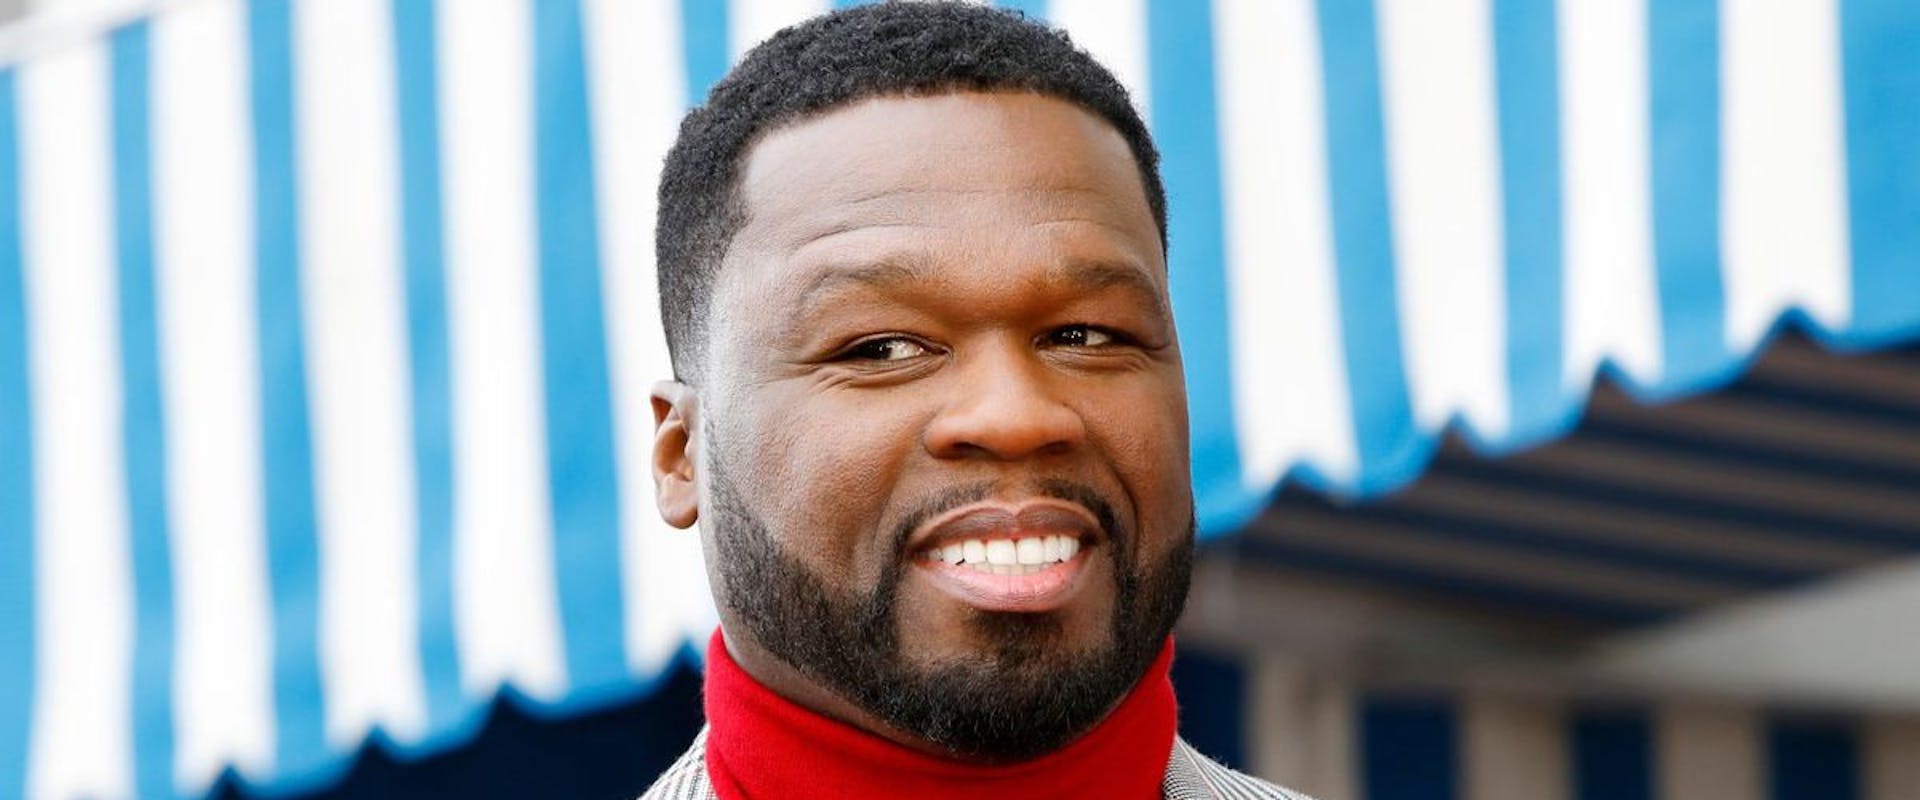 50 Cent Admits To Lying In Some Of His Iconic Tracks